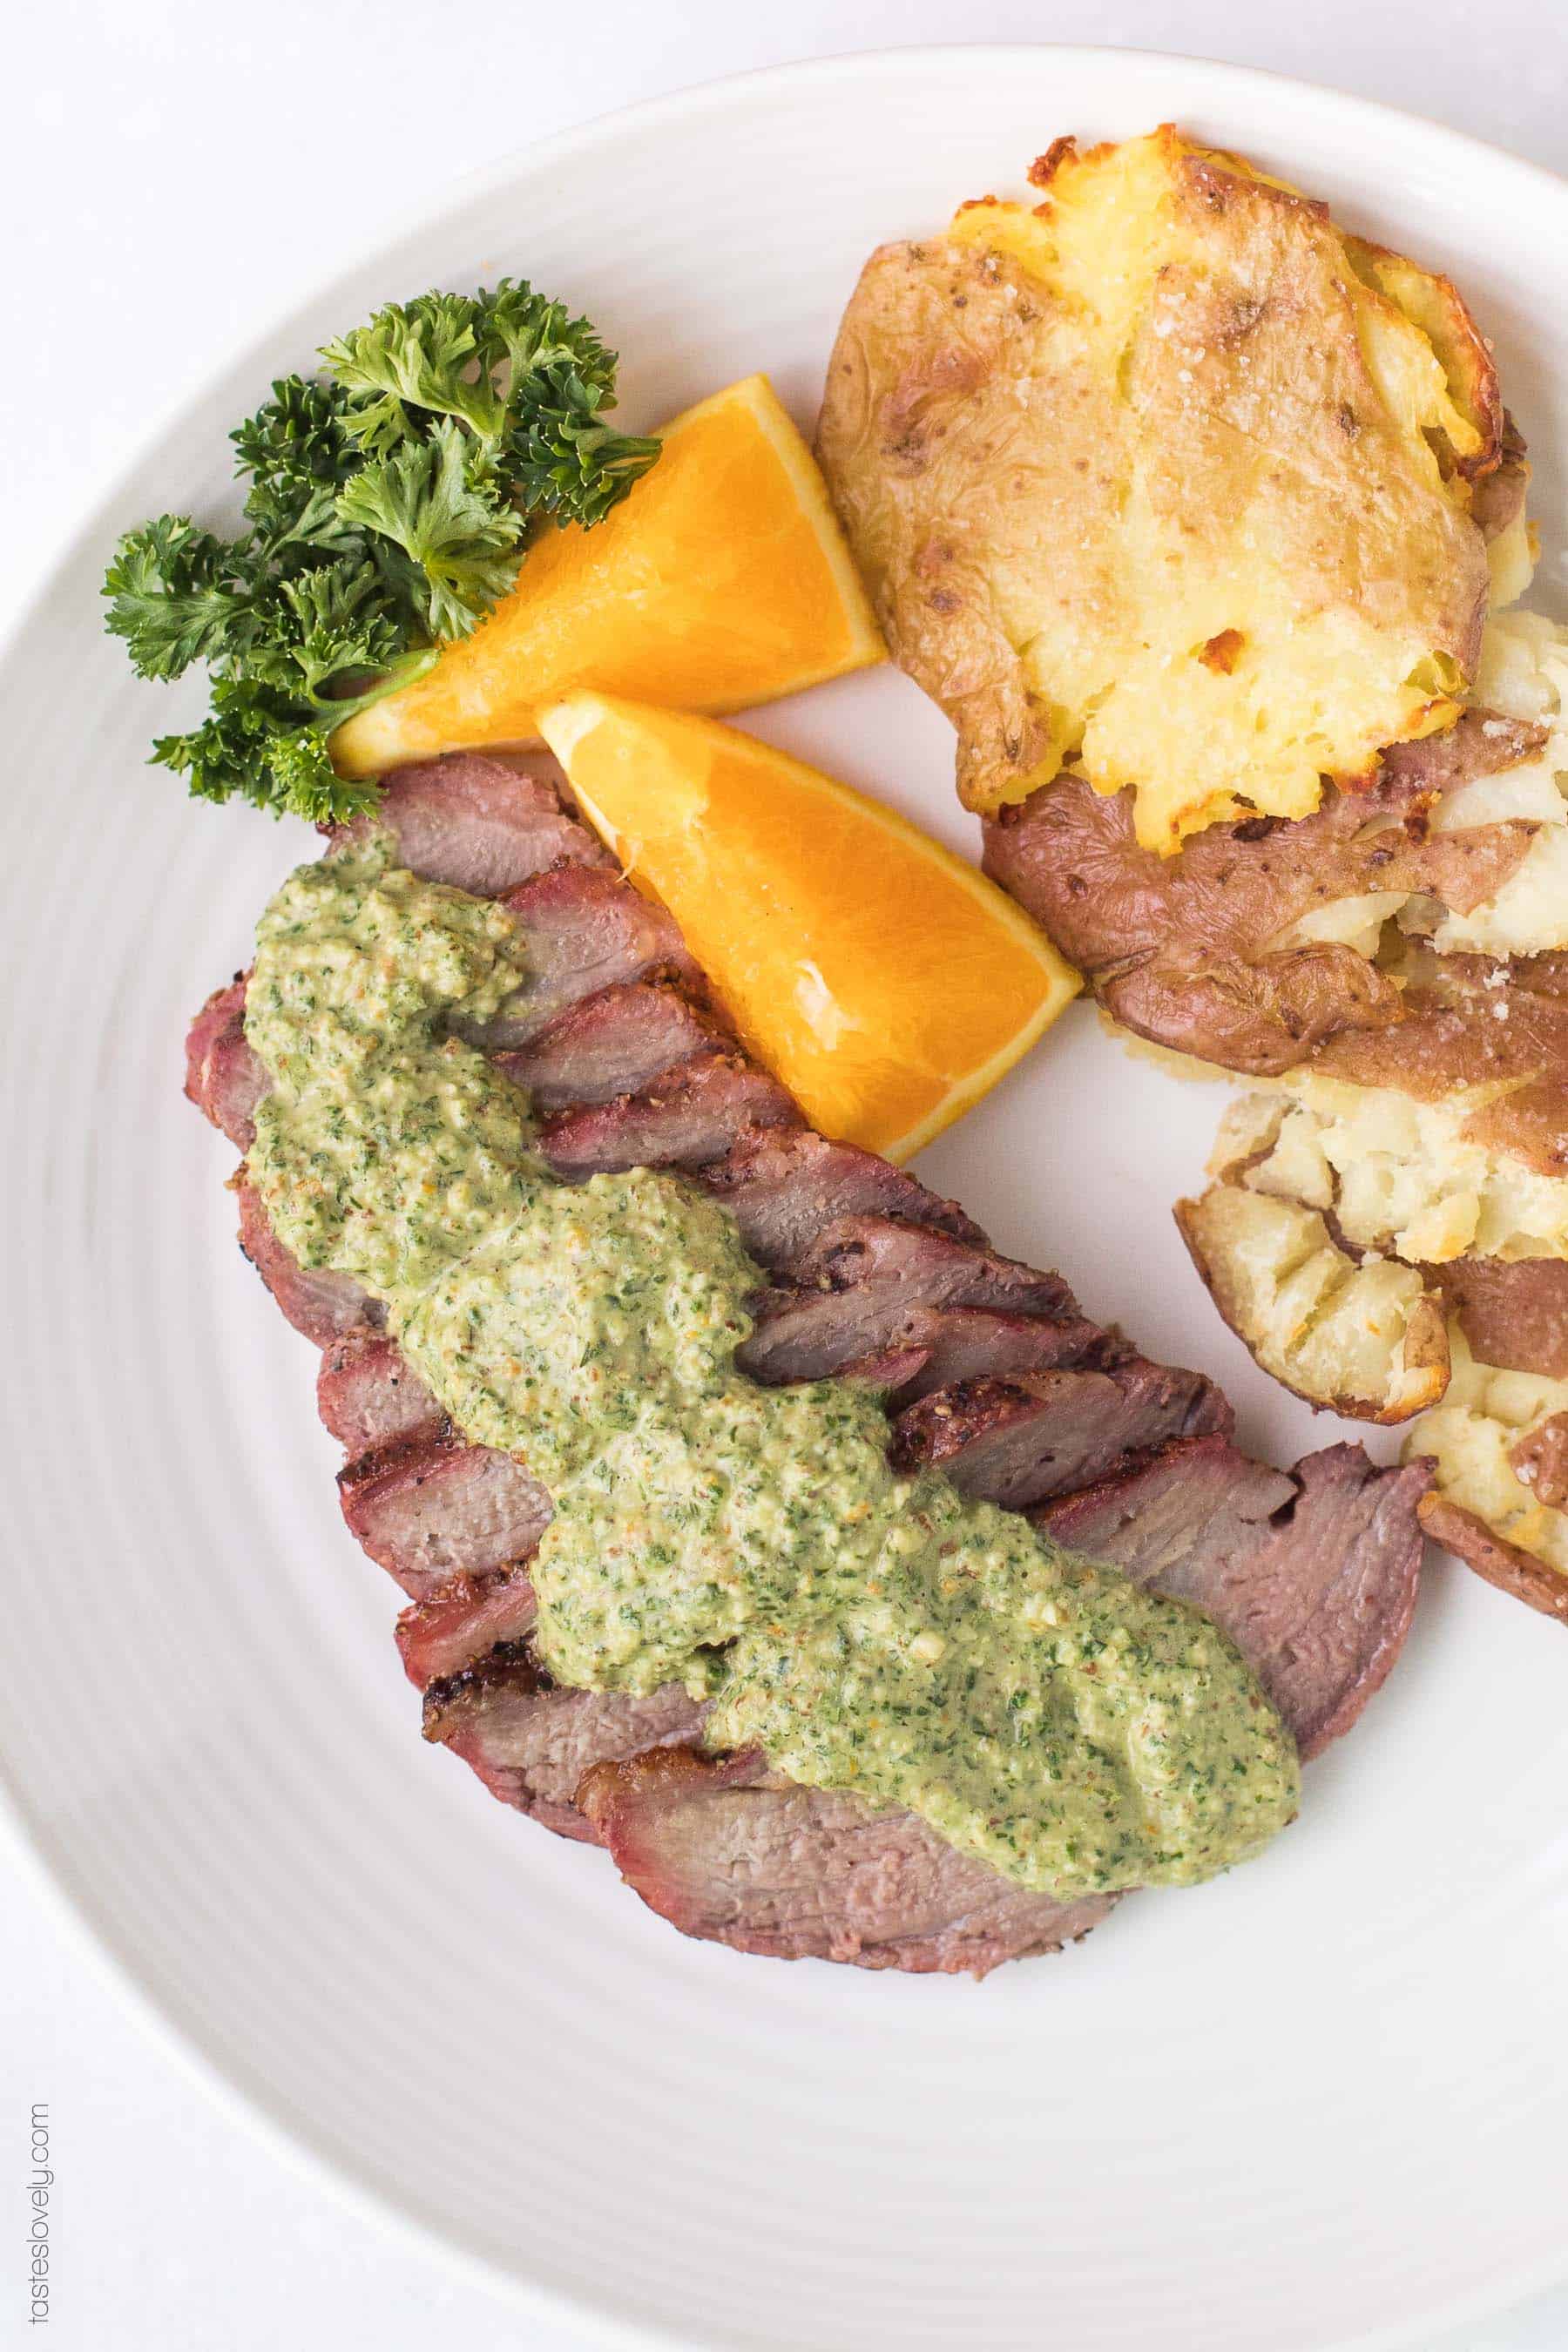 Paleo + Whole30 Tri Tip with Orange Parsley Sauce Recipe - a 30 minute summer grilling recipe. Gluten free, grain free, dairy free, sugar free, keto, clean eating, real food.